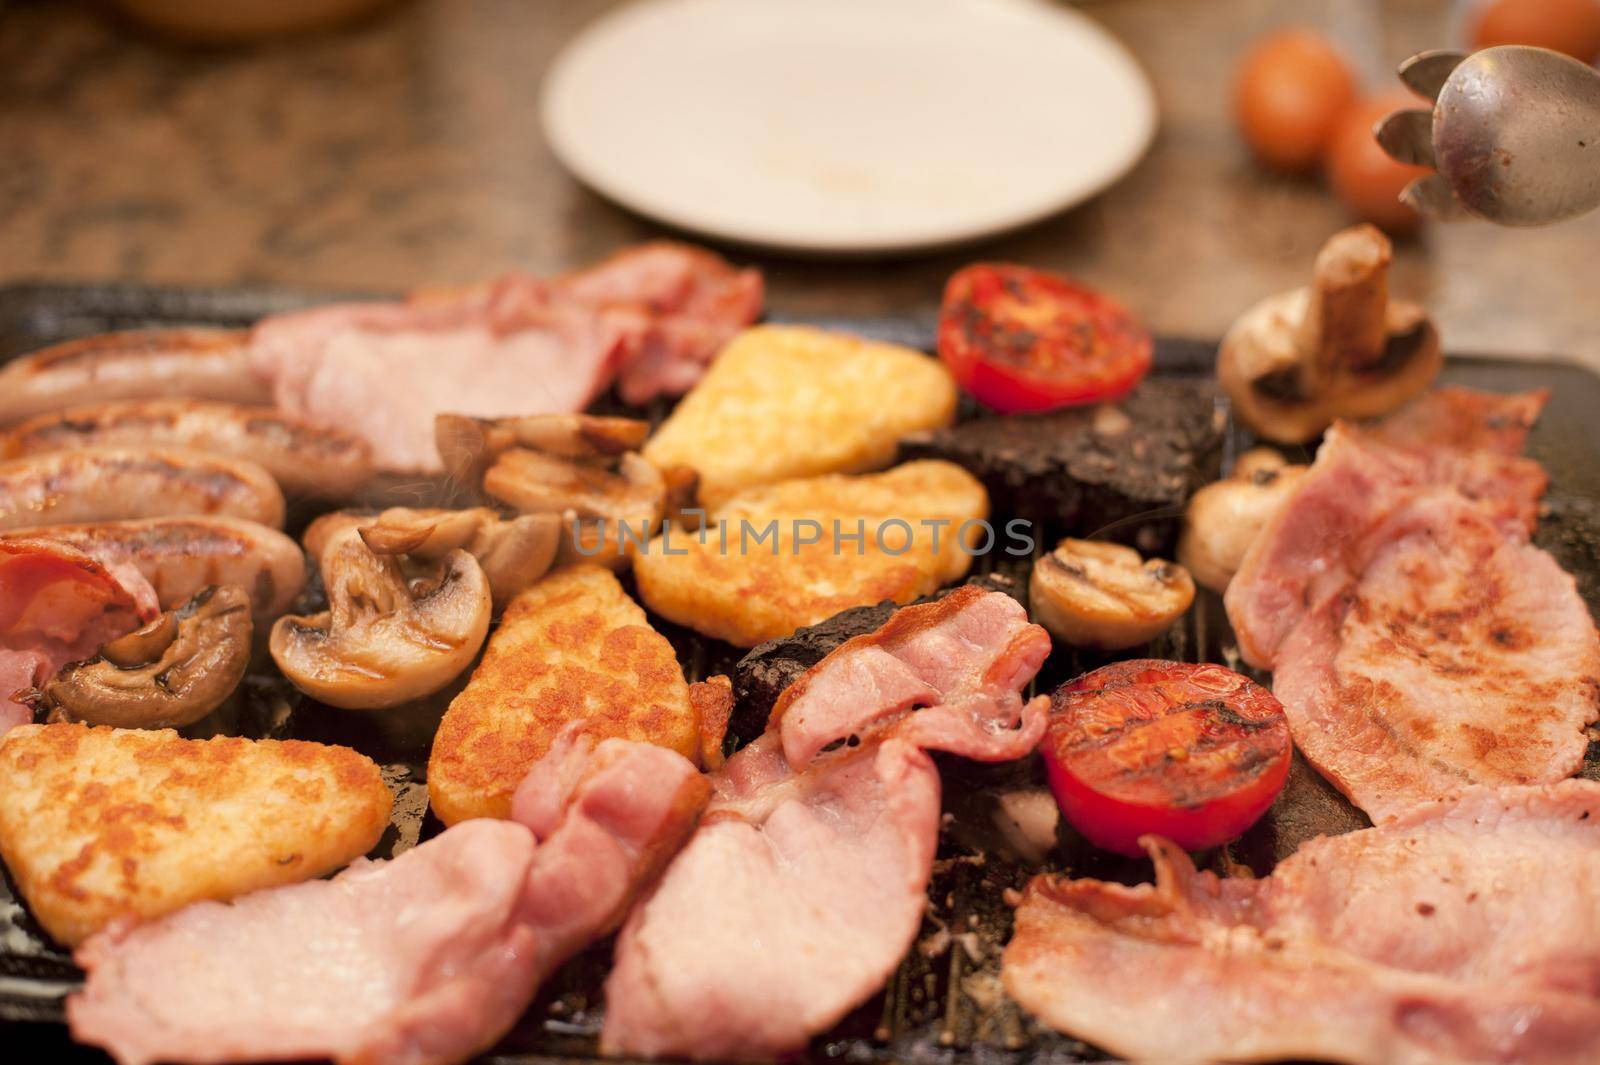 Wholesome English breakfast cooking on the griddle with bacon, hash browns, sausages, tomatoes and mushrooms